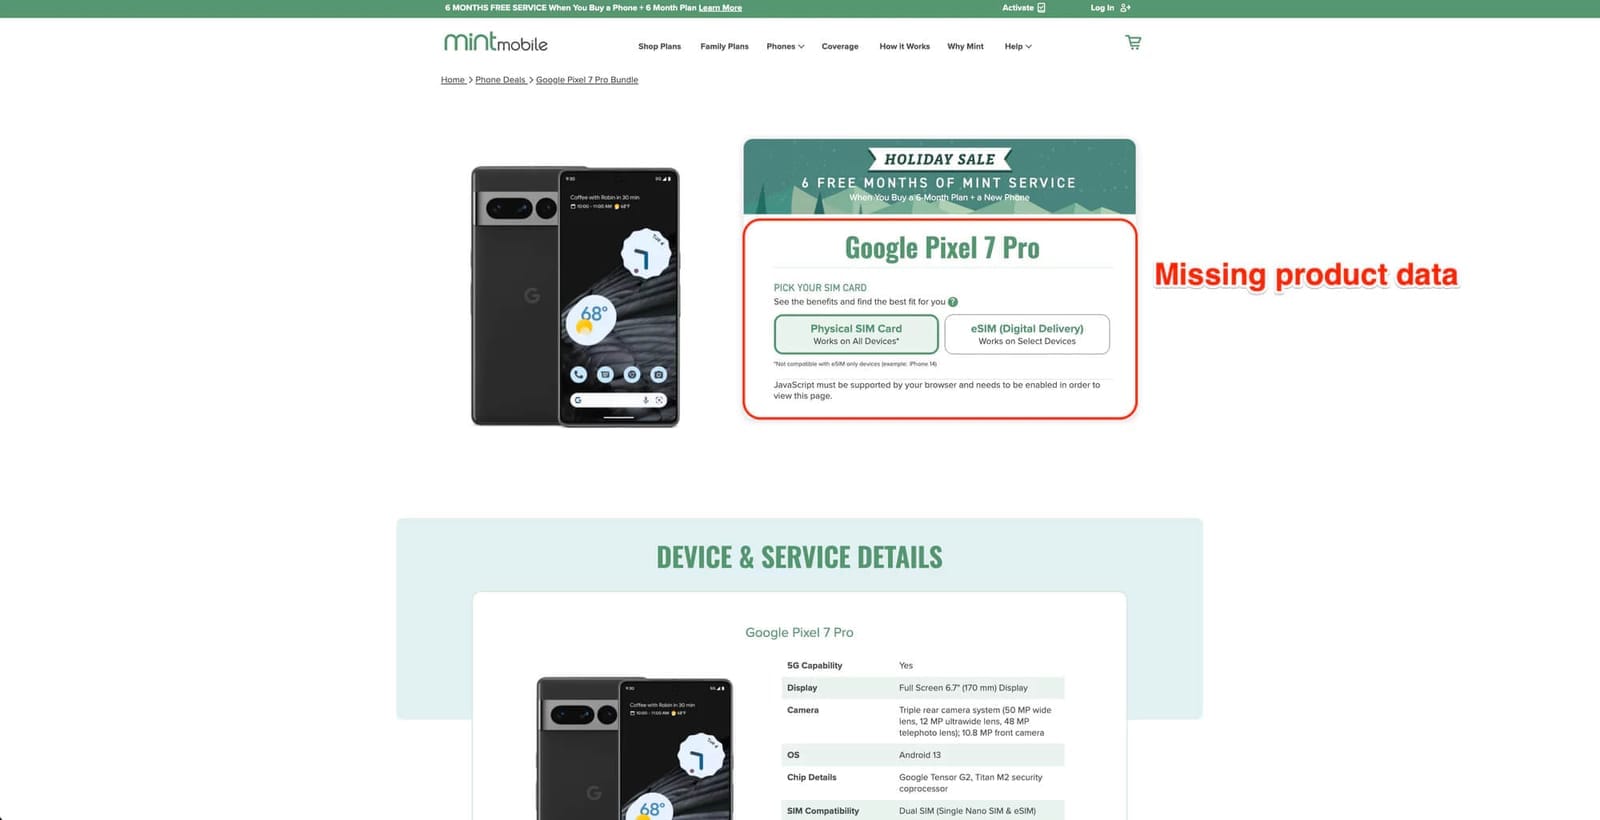 Mint Mobile web page with JavaScript disabled. Source: Python web scraping tutorial